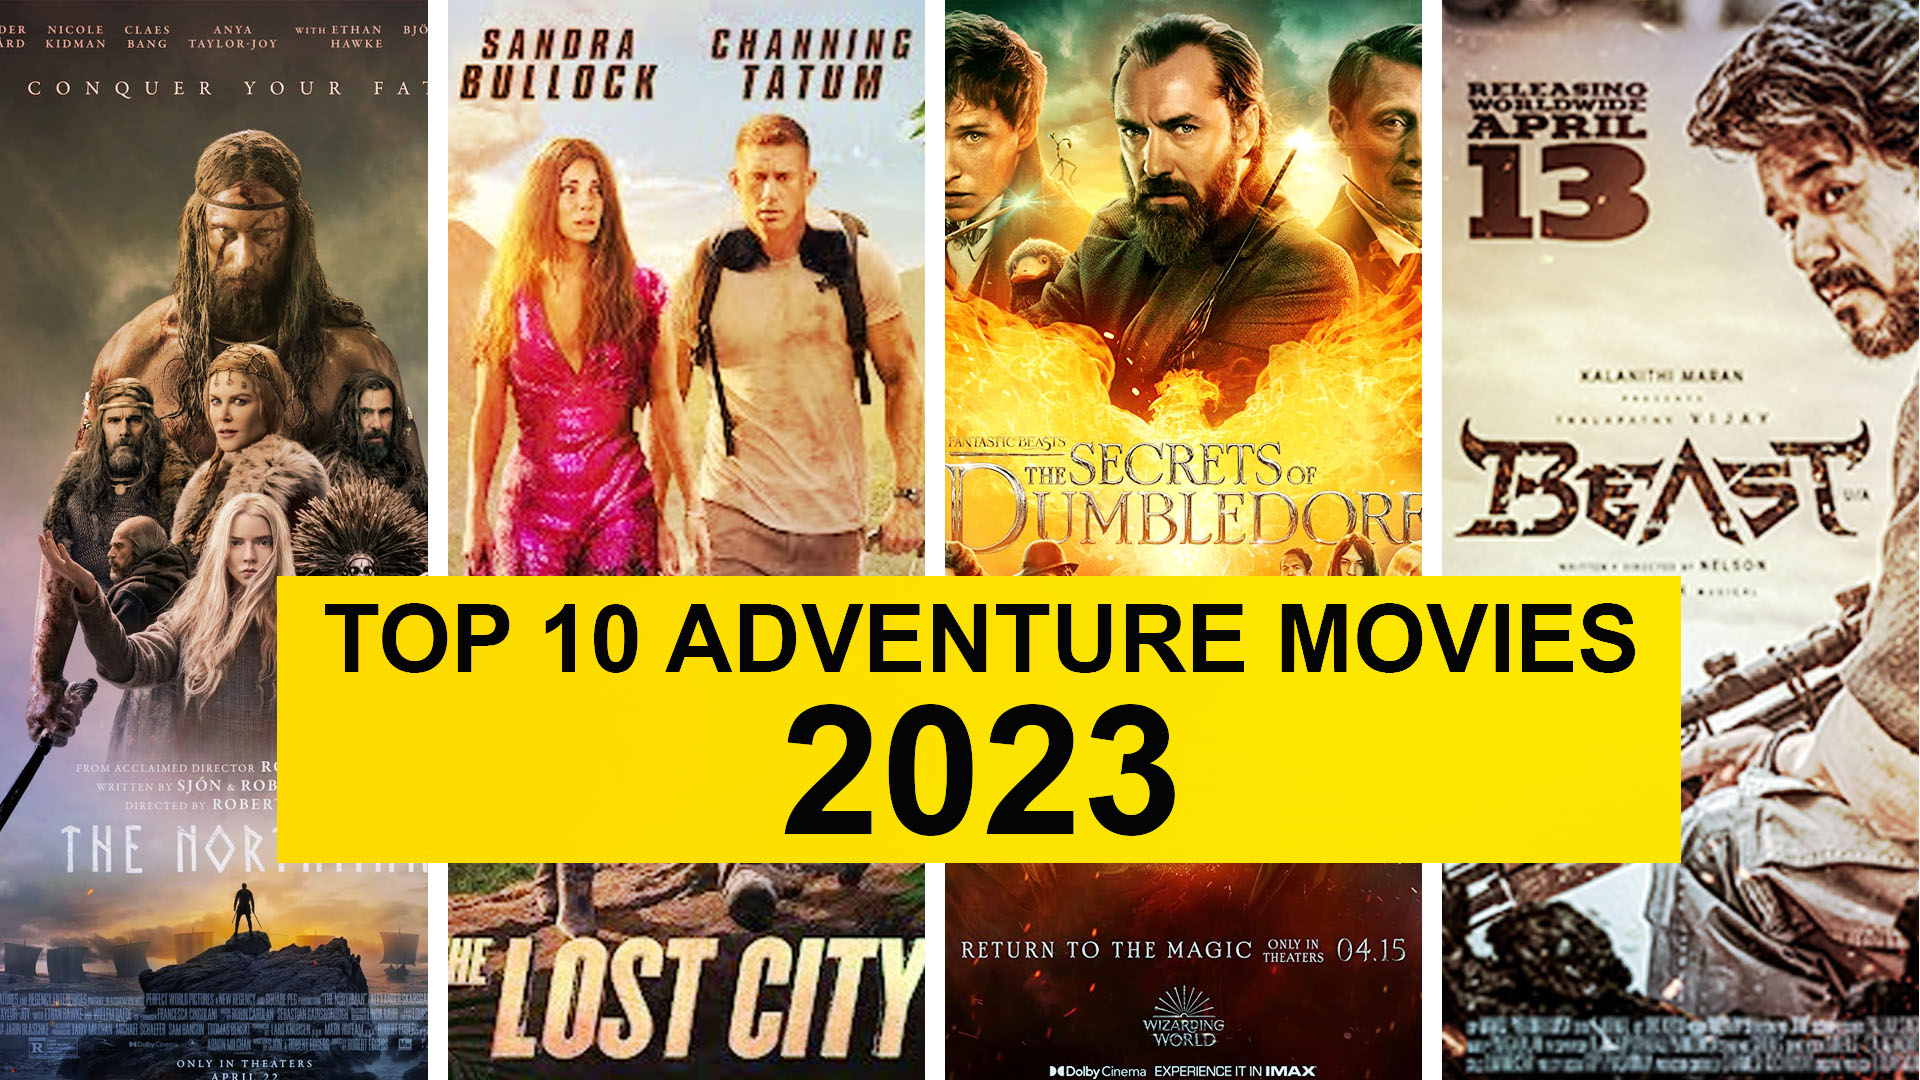 Top 10 Adventure Movies of 2022 Daily Research Plot